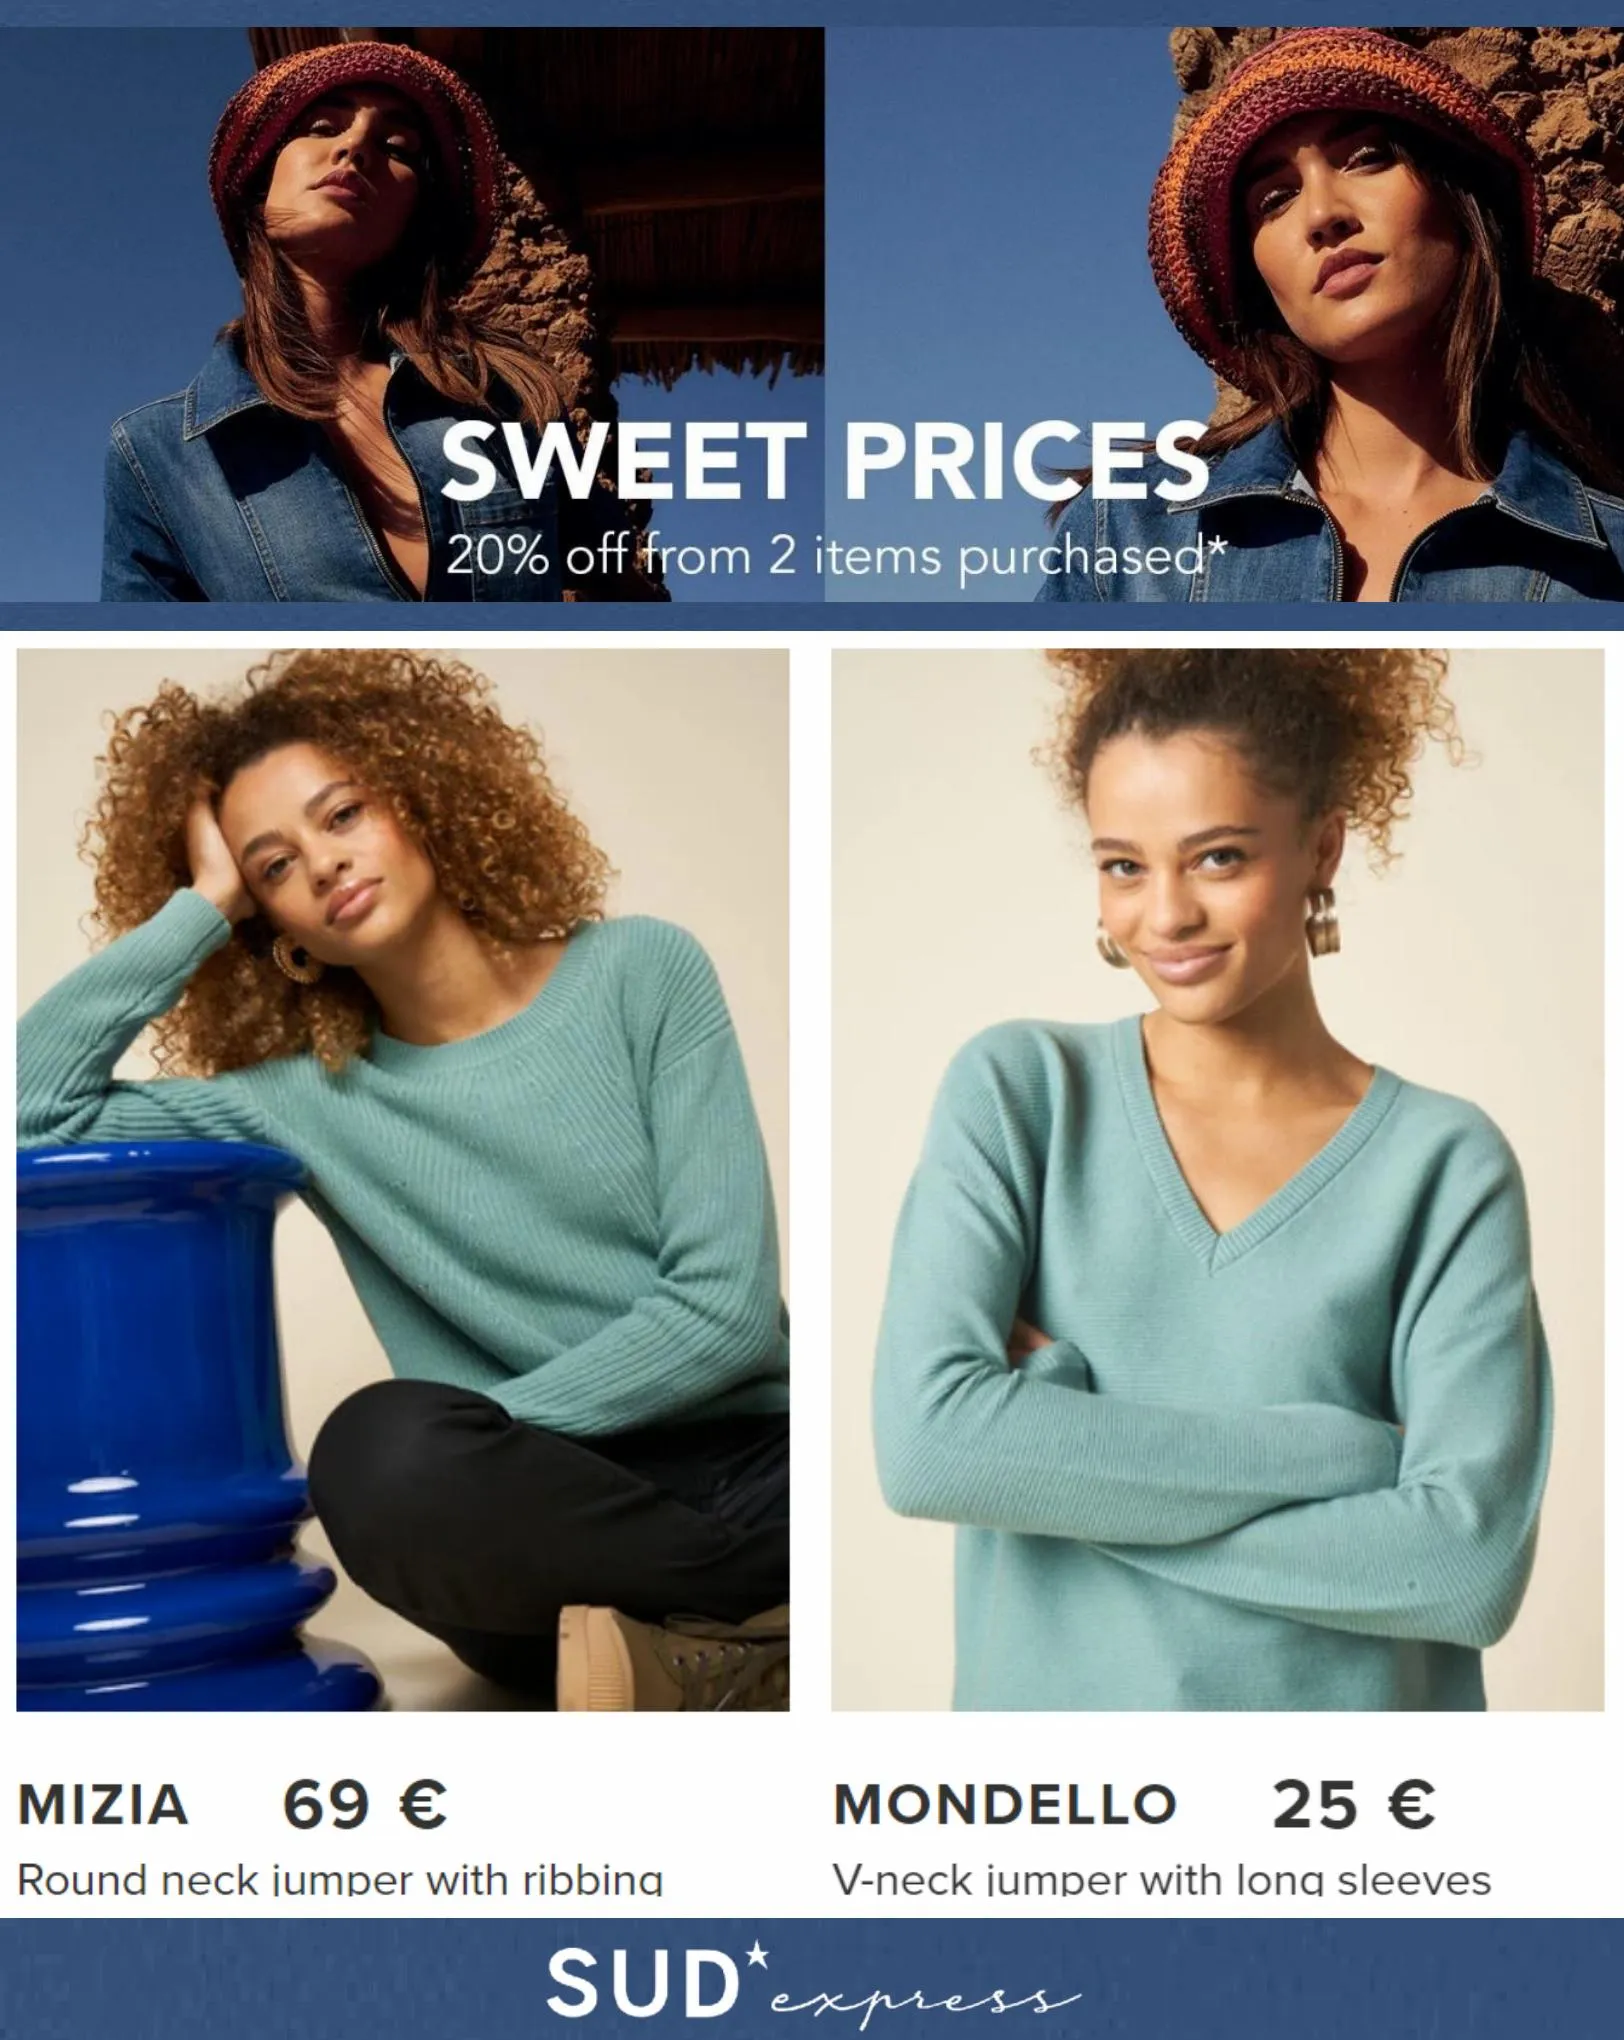 Catalogue Sweet Prices 20% Off from 2 Pieces*, page 00005